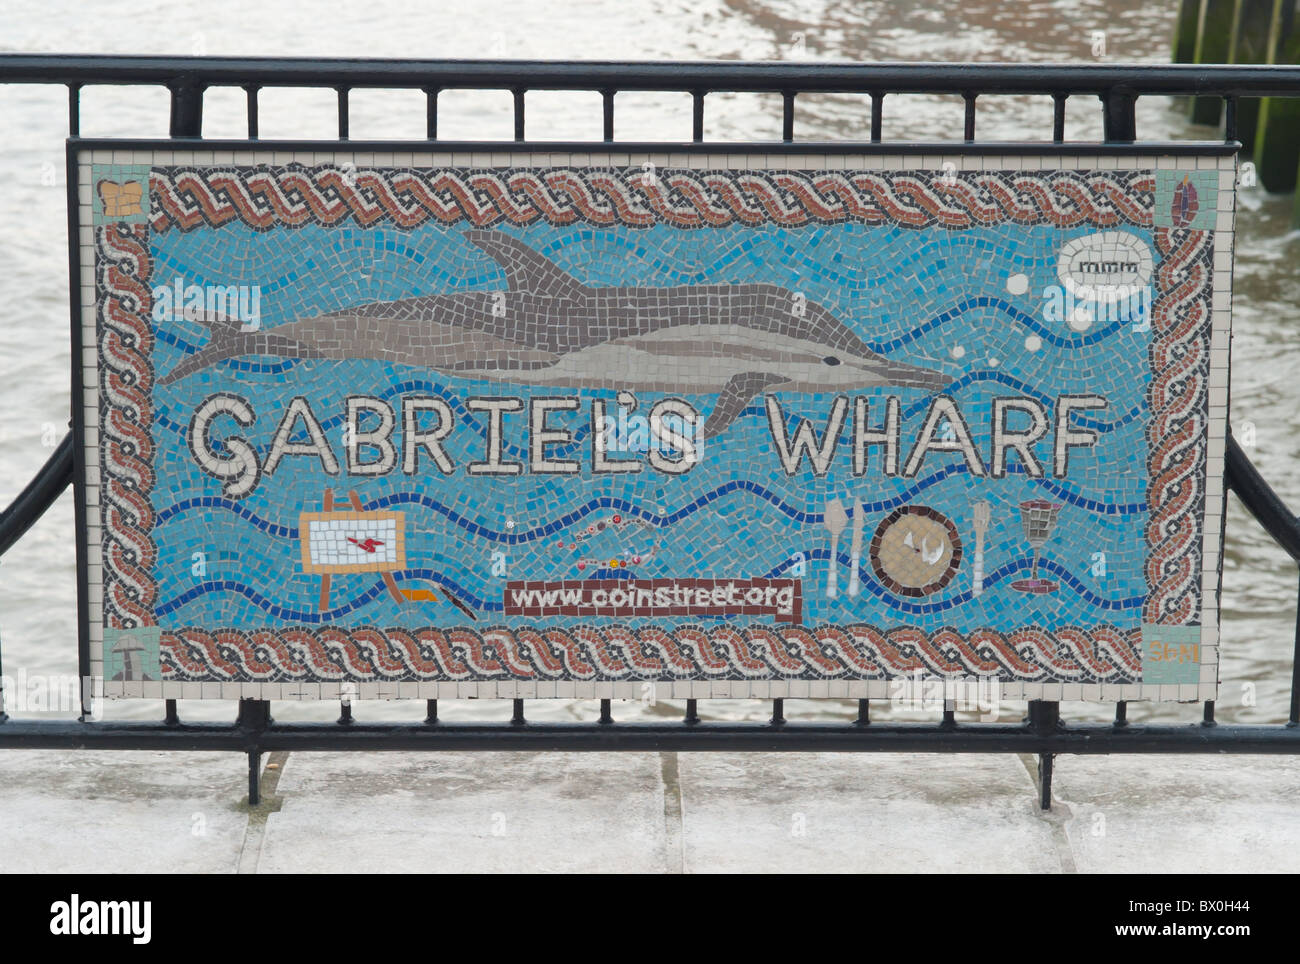 A sign for Gabriel's Wharf, located on the South Bank in London, England, UK. Stock Photo